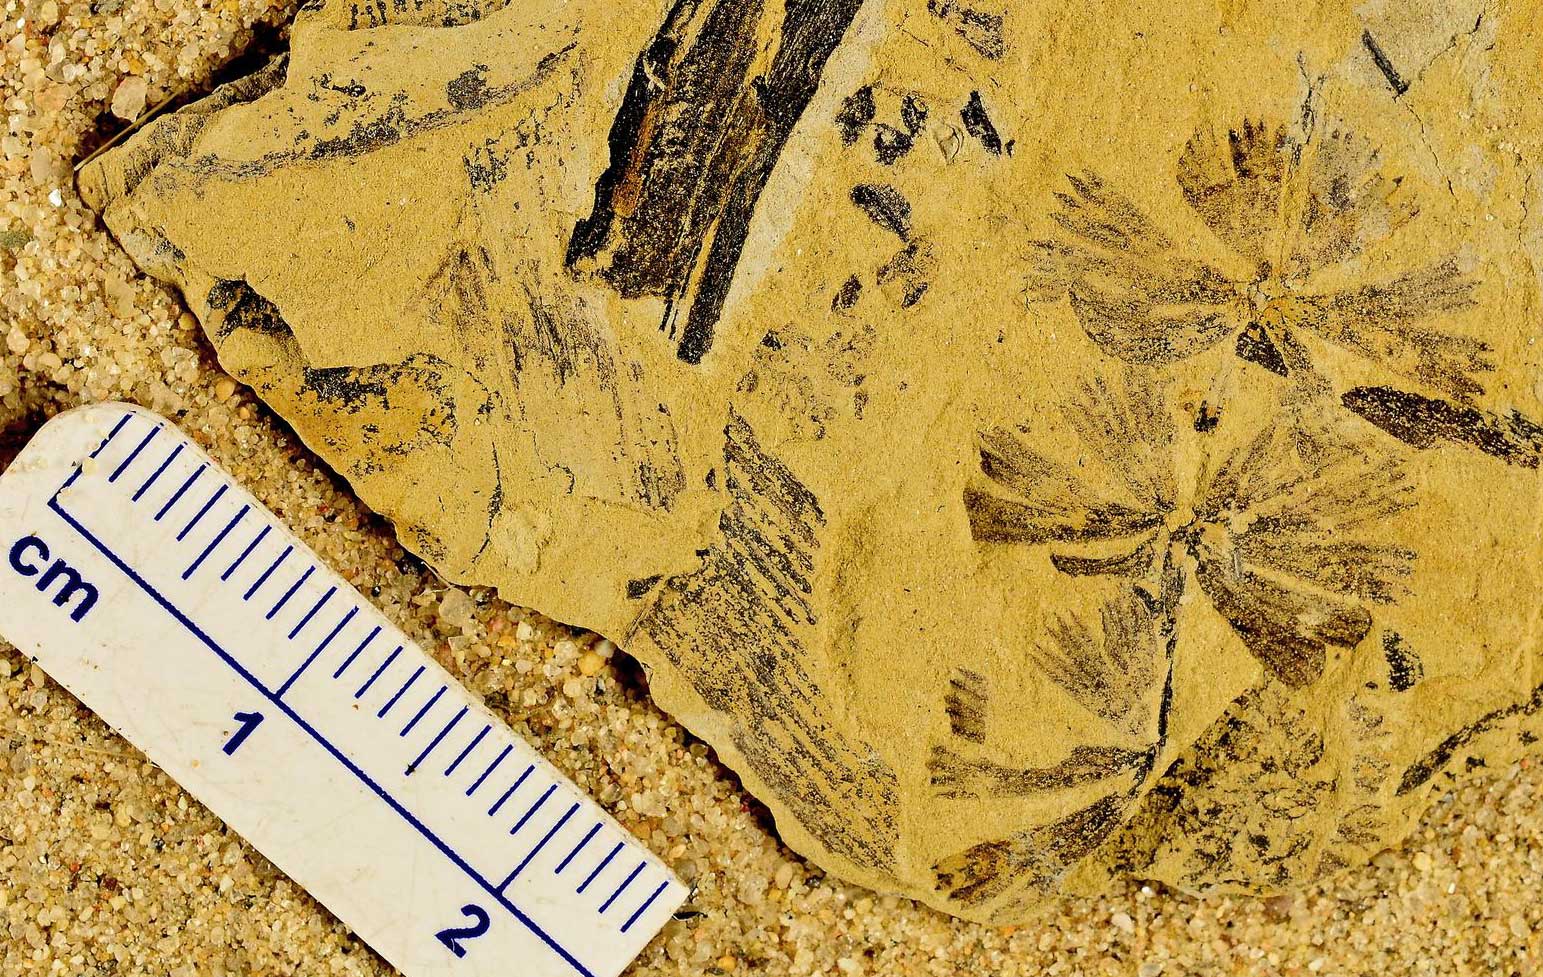 Photograph of a rock with multiple plant fragments from the Pennsylvanian of Kansas. Plants include leaves of sphenophyllum in whorls and stem-fragments of a horsetail-like plant with ridges.